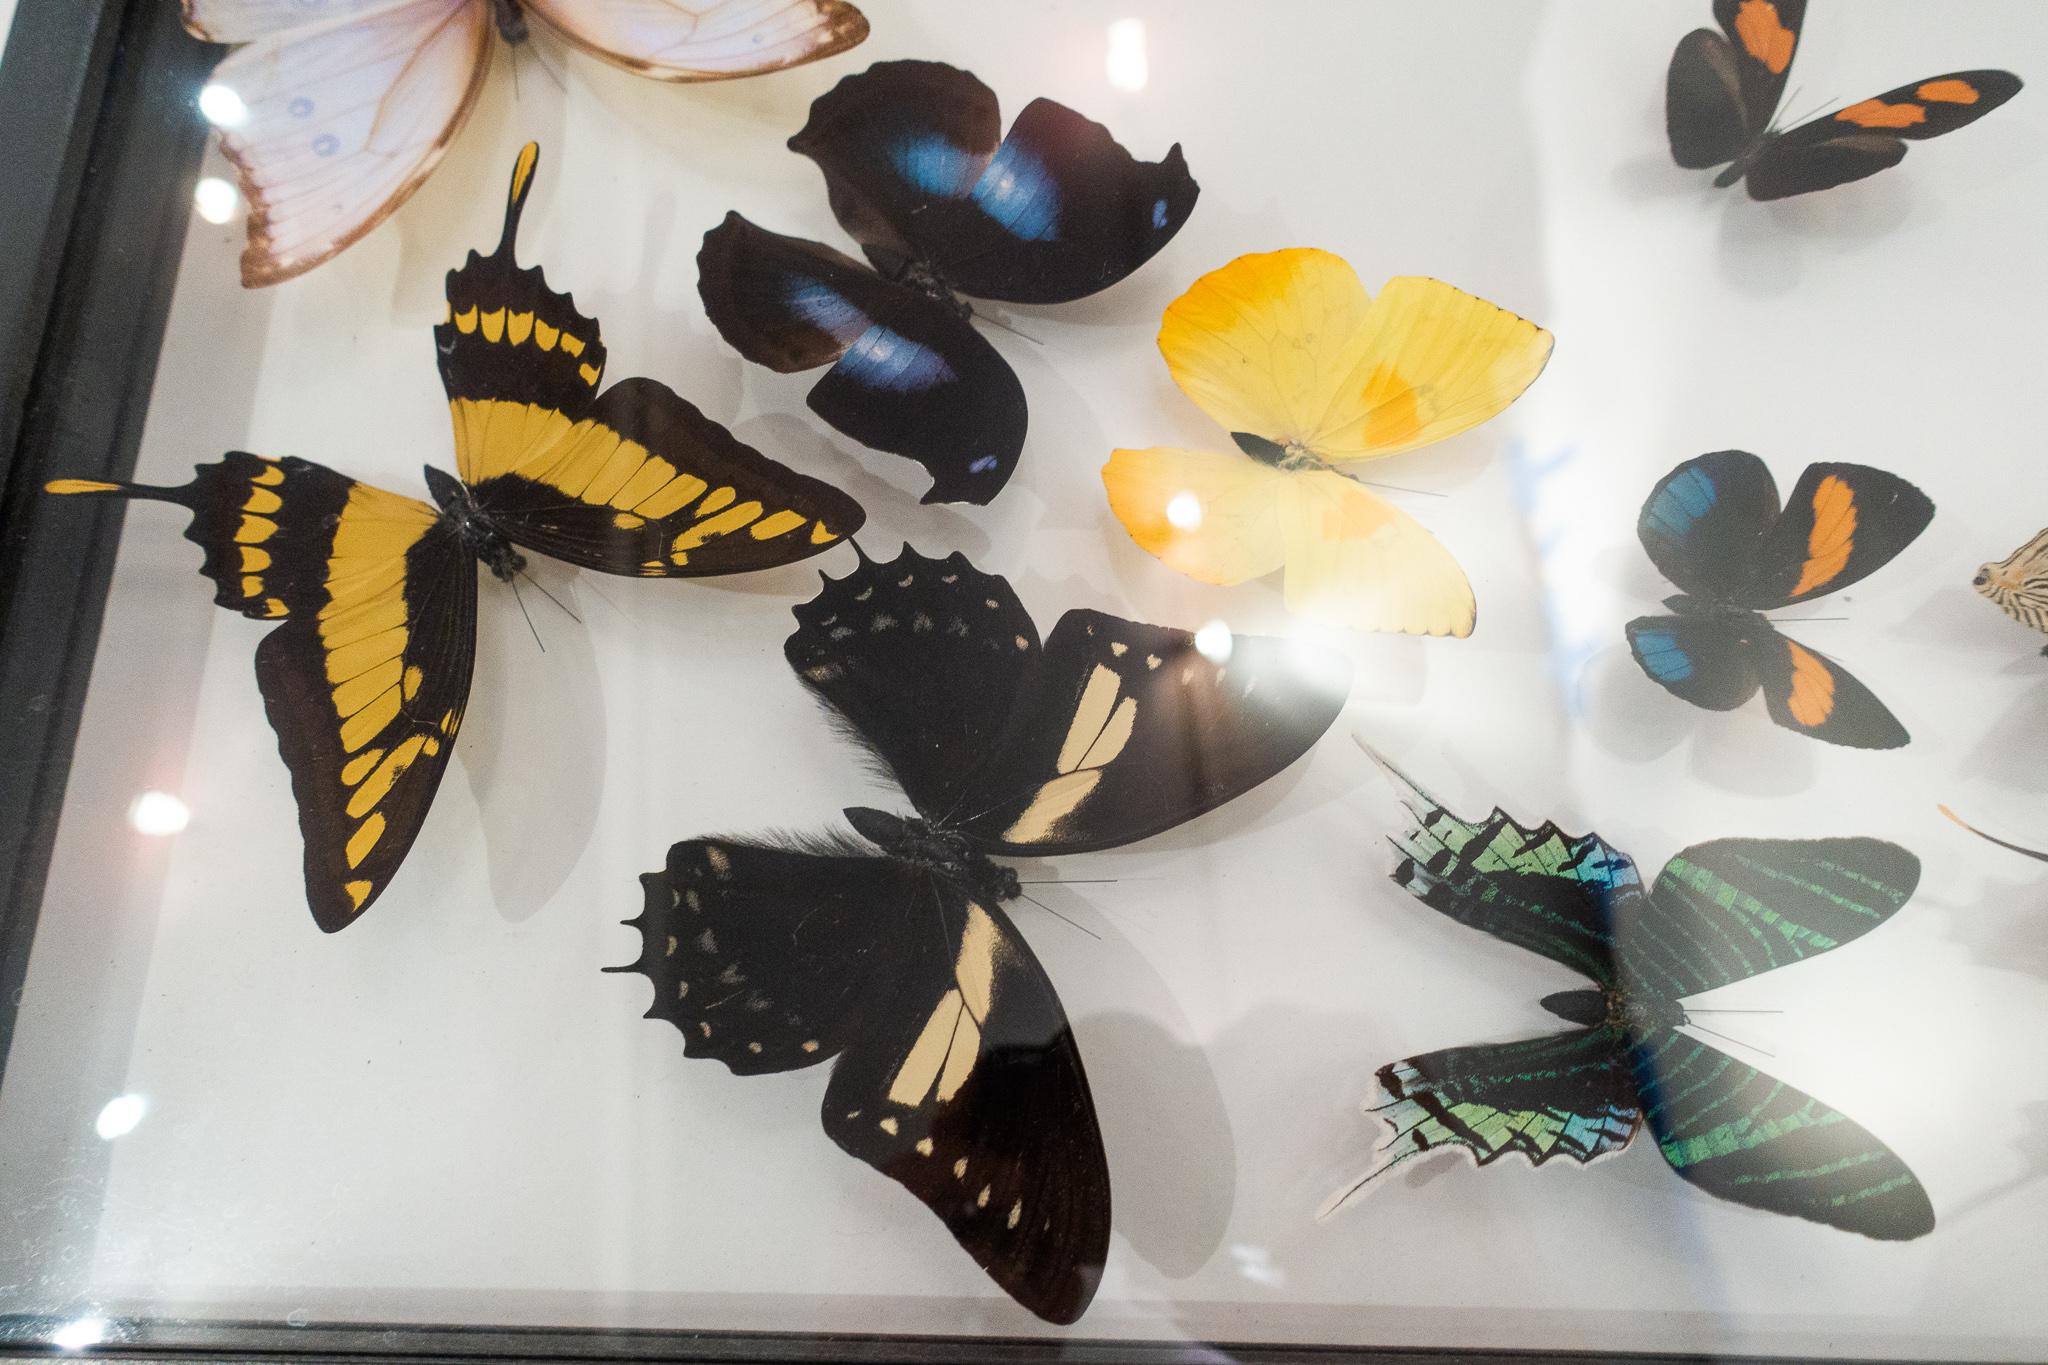 Large collection of mounted butterflies in a double glass frame. This piece has a variety of different species including Morpho Didius, Heliconius Dorus, and Urania Leilus.